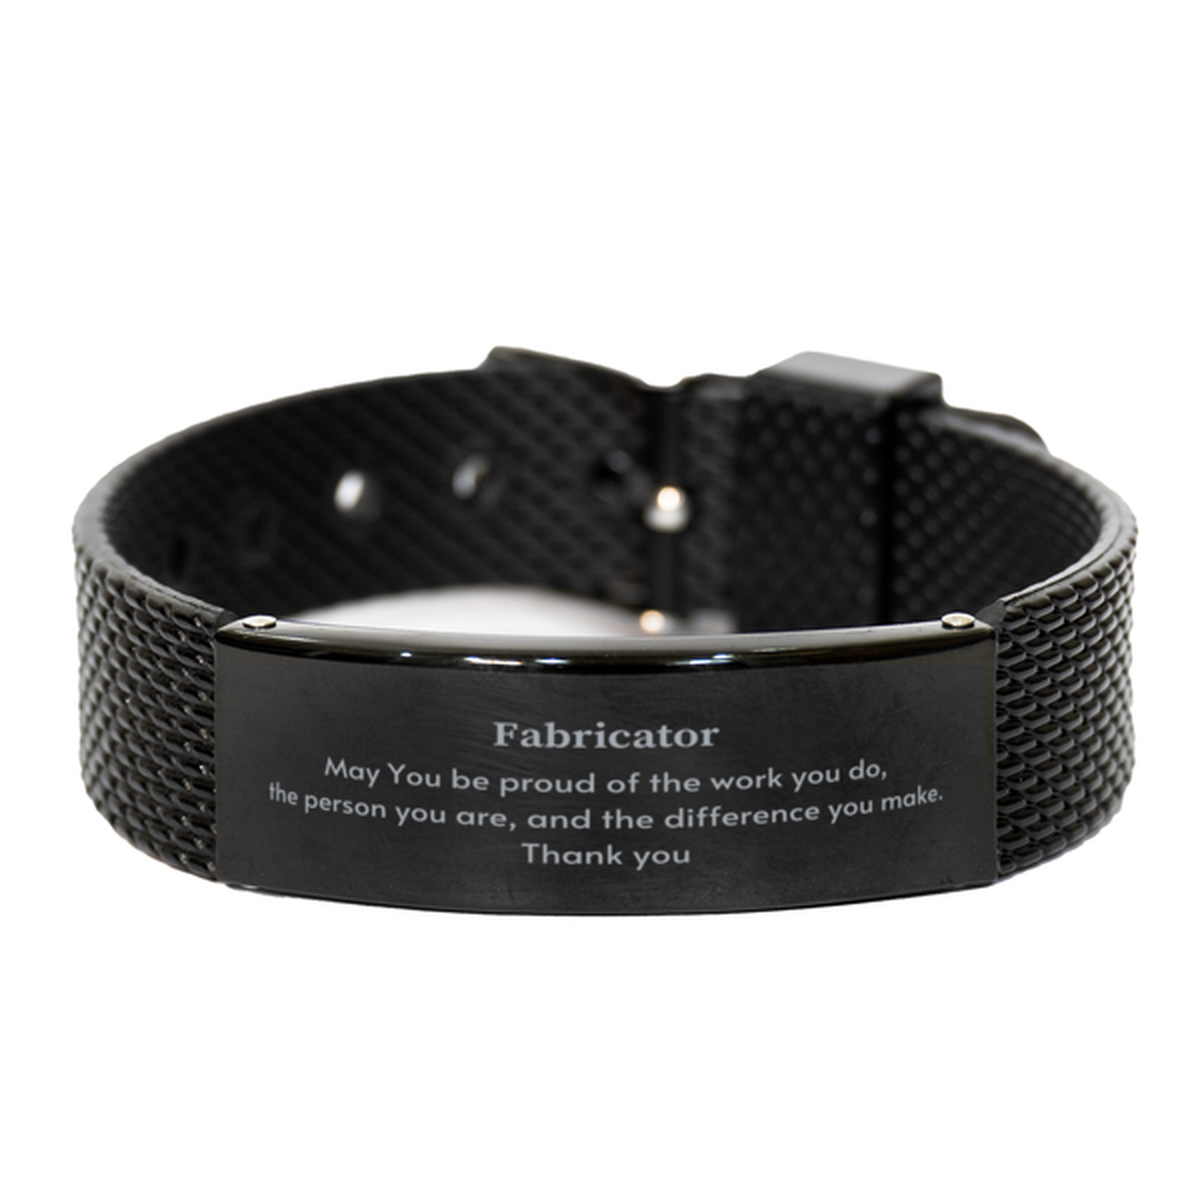 Heartwarming Black Shark Mesh Bracelet Retirement Coworkers Gifts for Fabricator, Fabricator May You be proud of the work you do, the person you are Gifts for Boss Men Women Friends